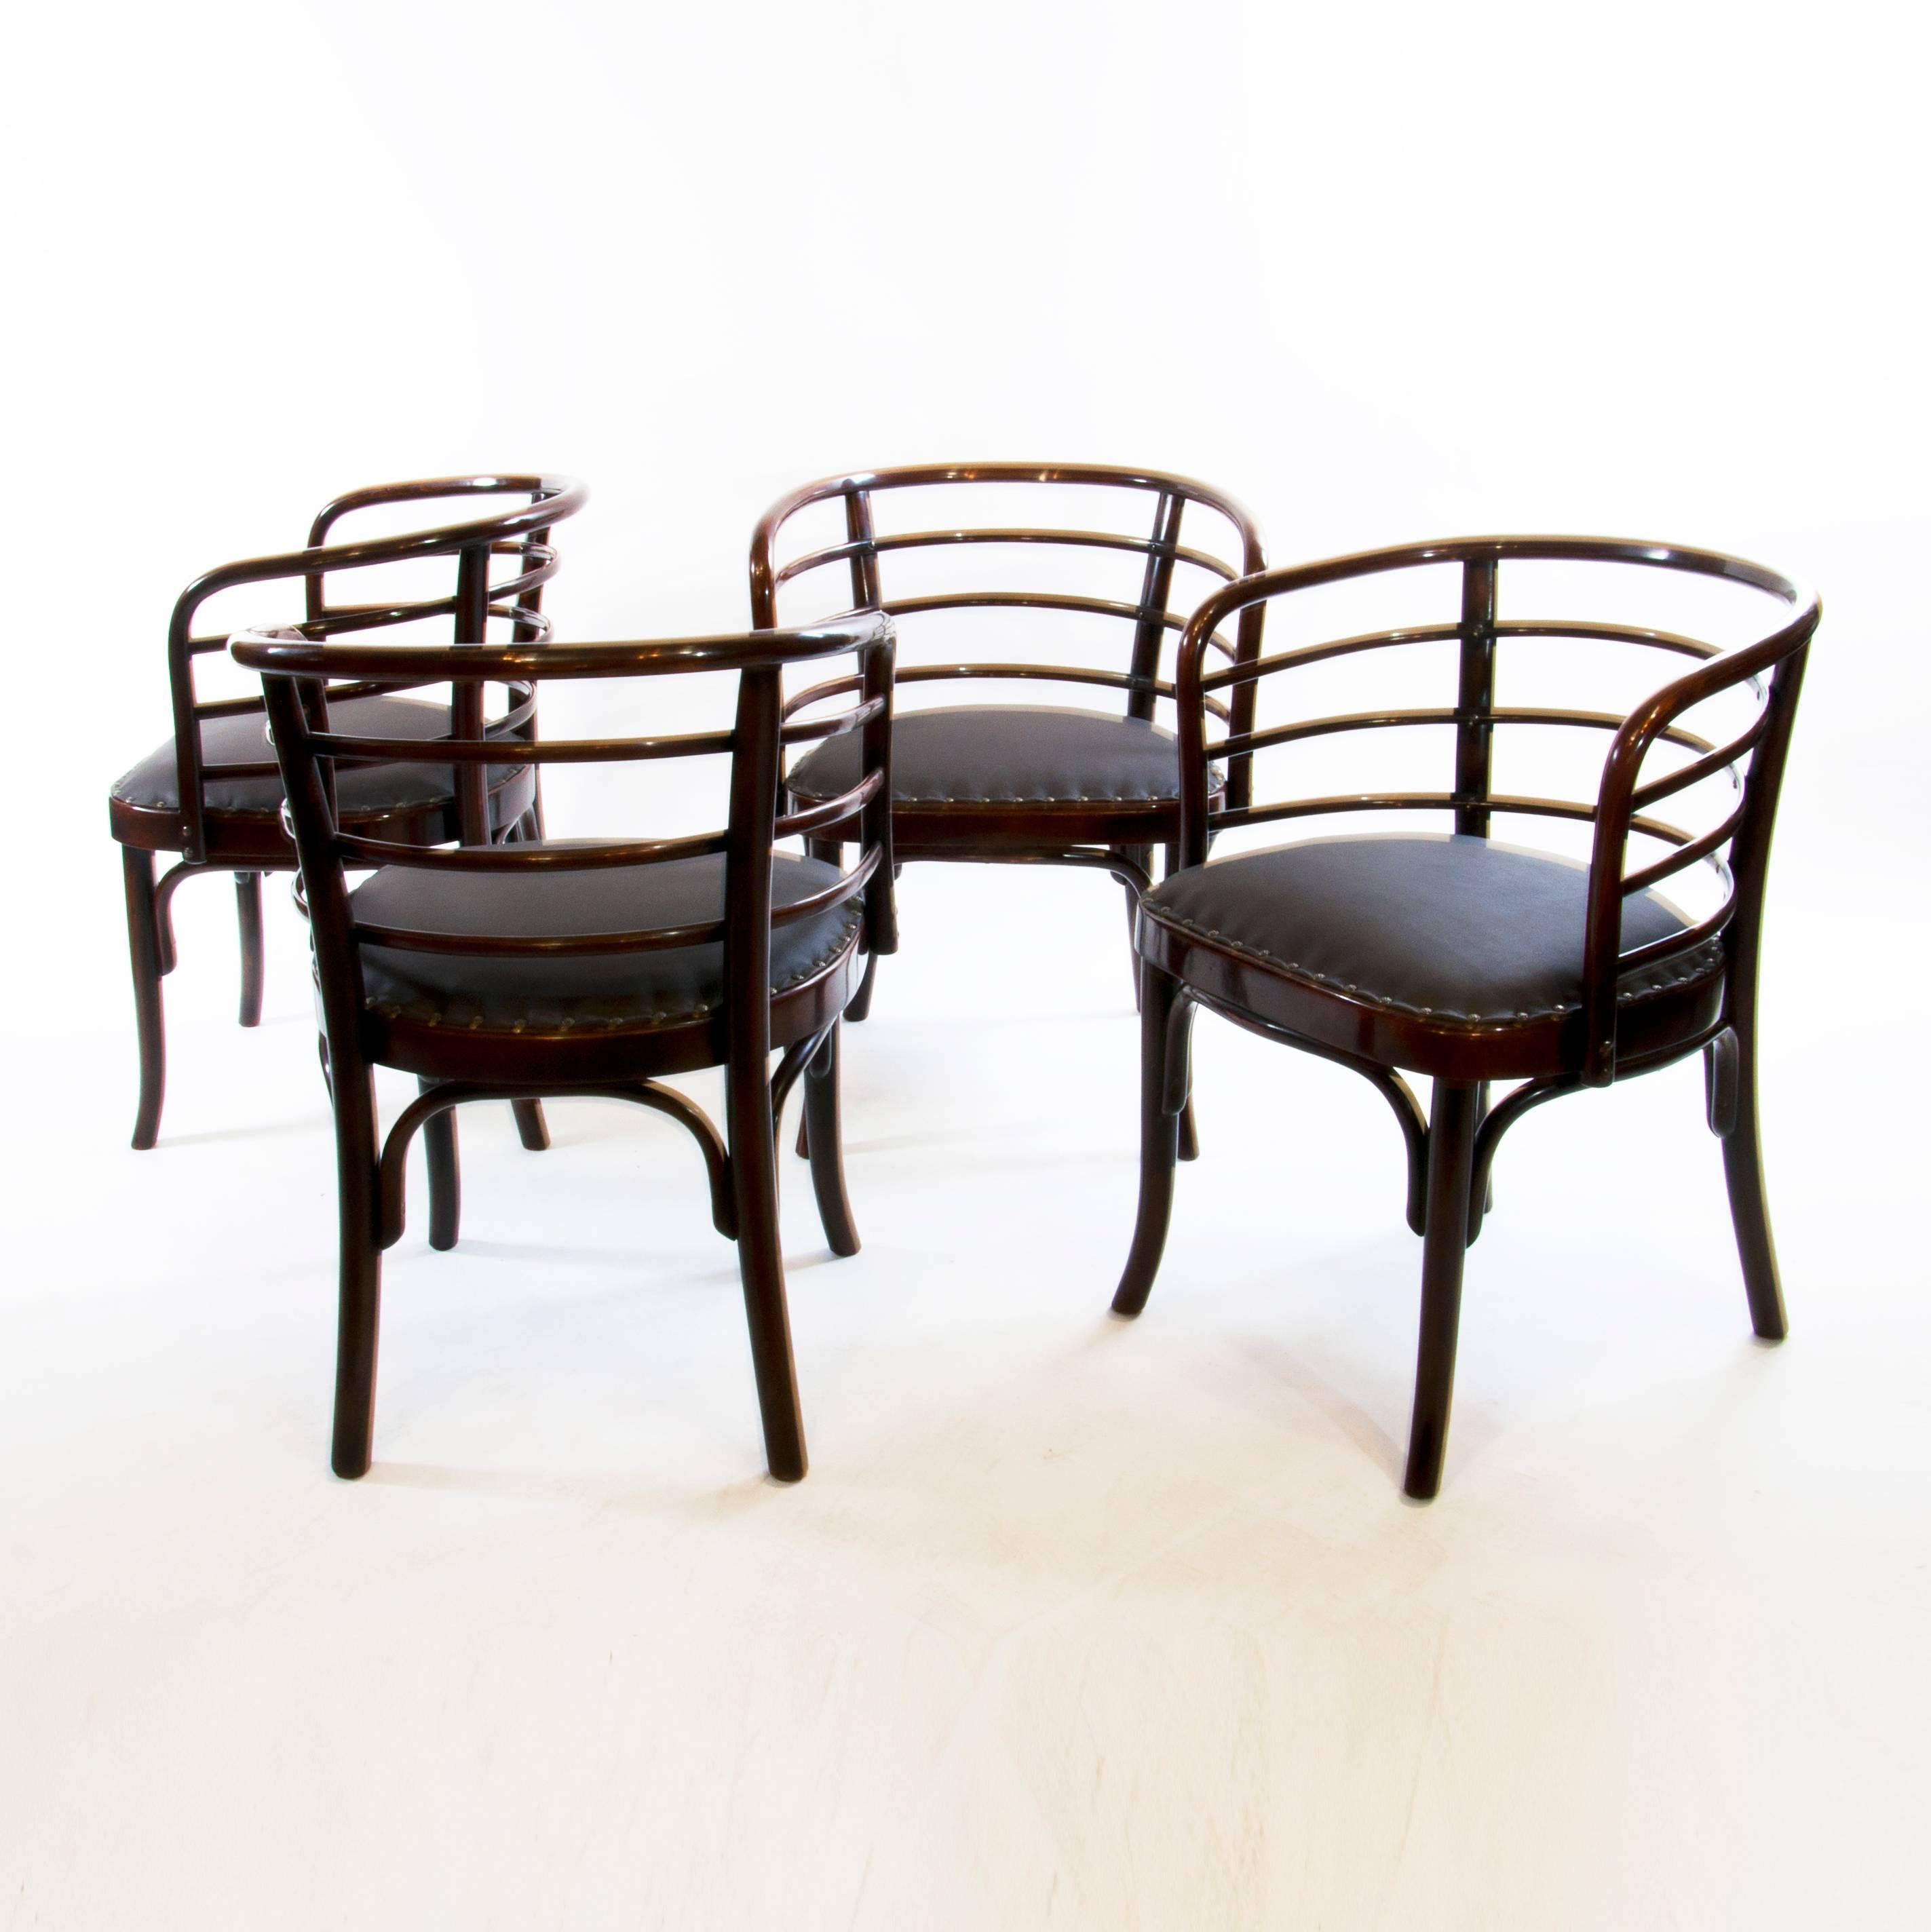 German Set of Four Josef Frank Bentwod Dinner Armchairs for Thonet, 1930 For Sale